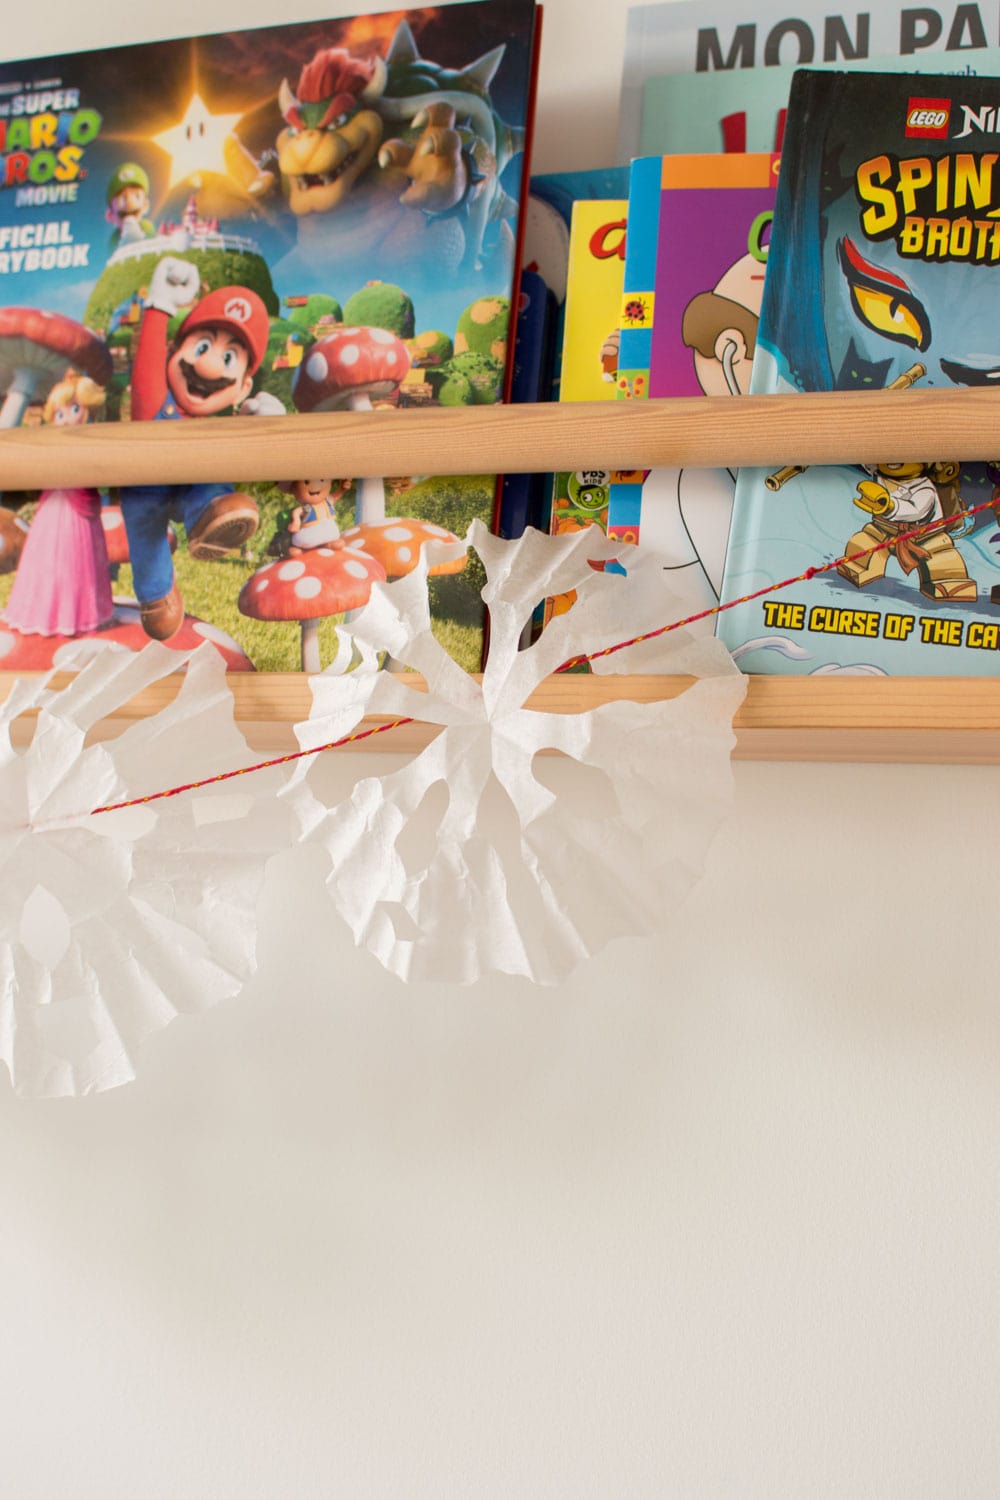 A garland made up of red string and coffee filter snowflakes hanging off a wall bookshelf